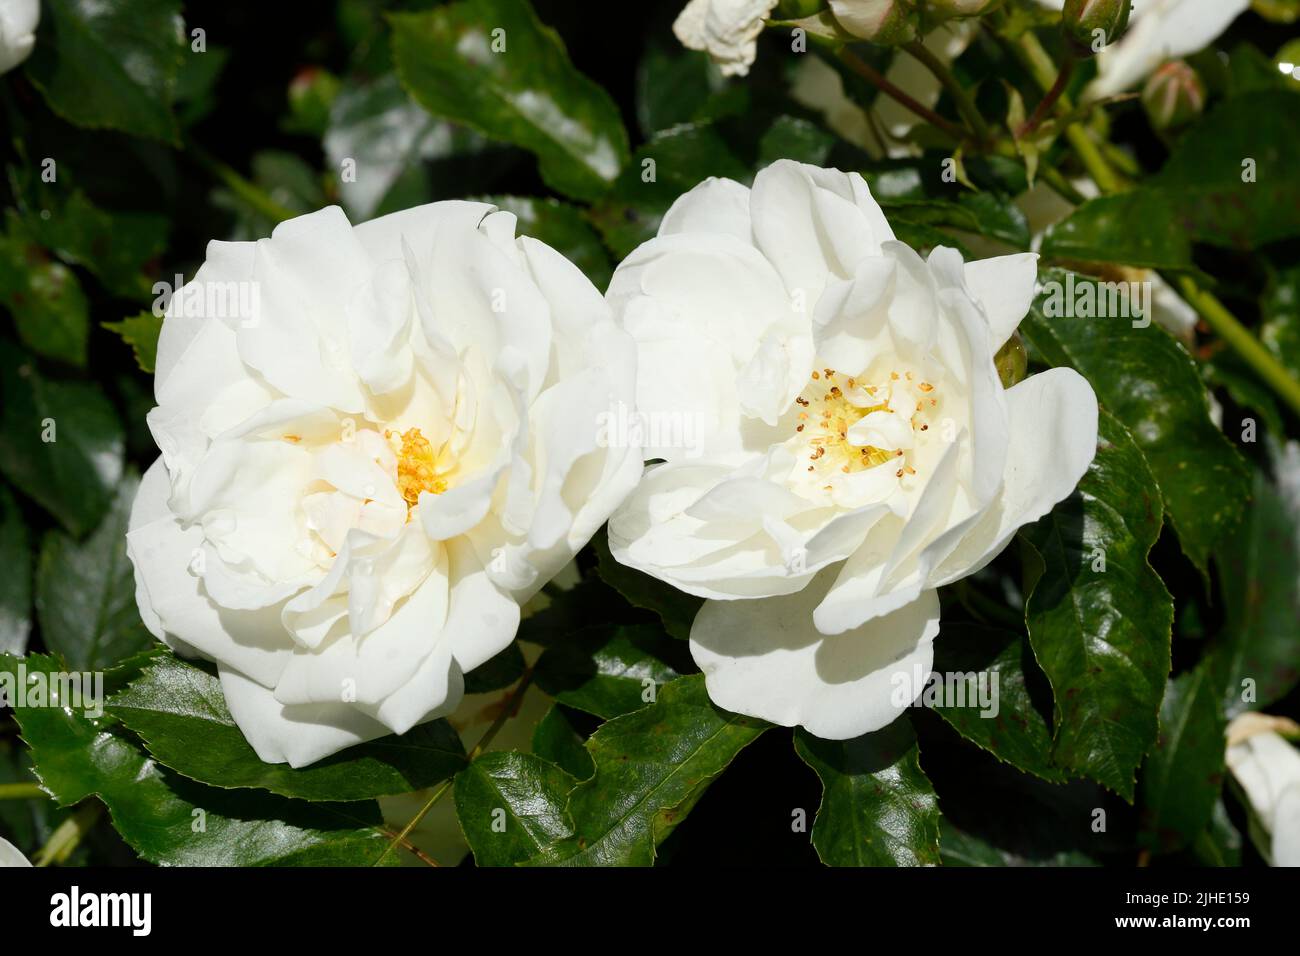 White roses, green background, Germany Stock Photo